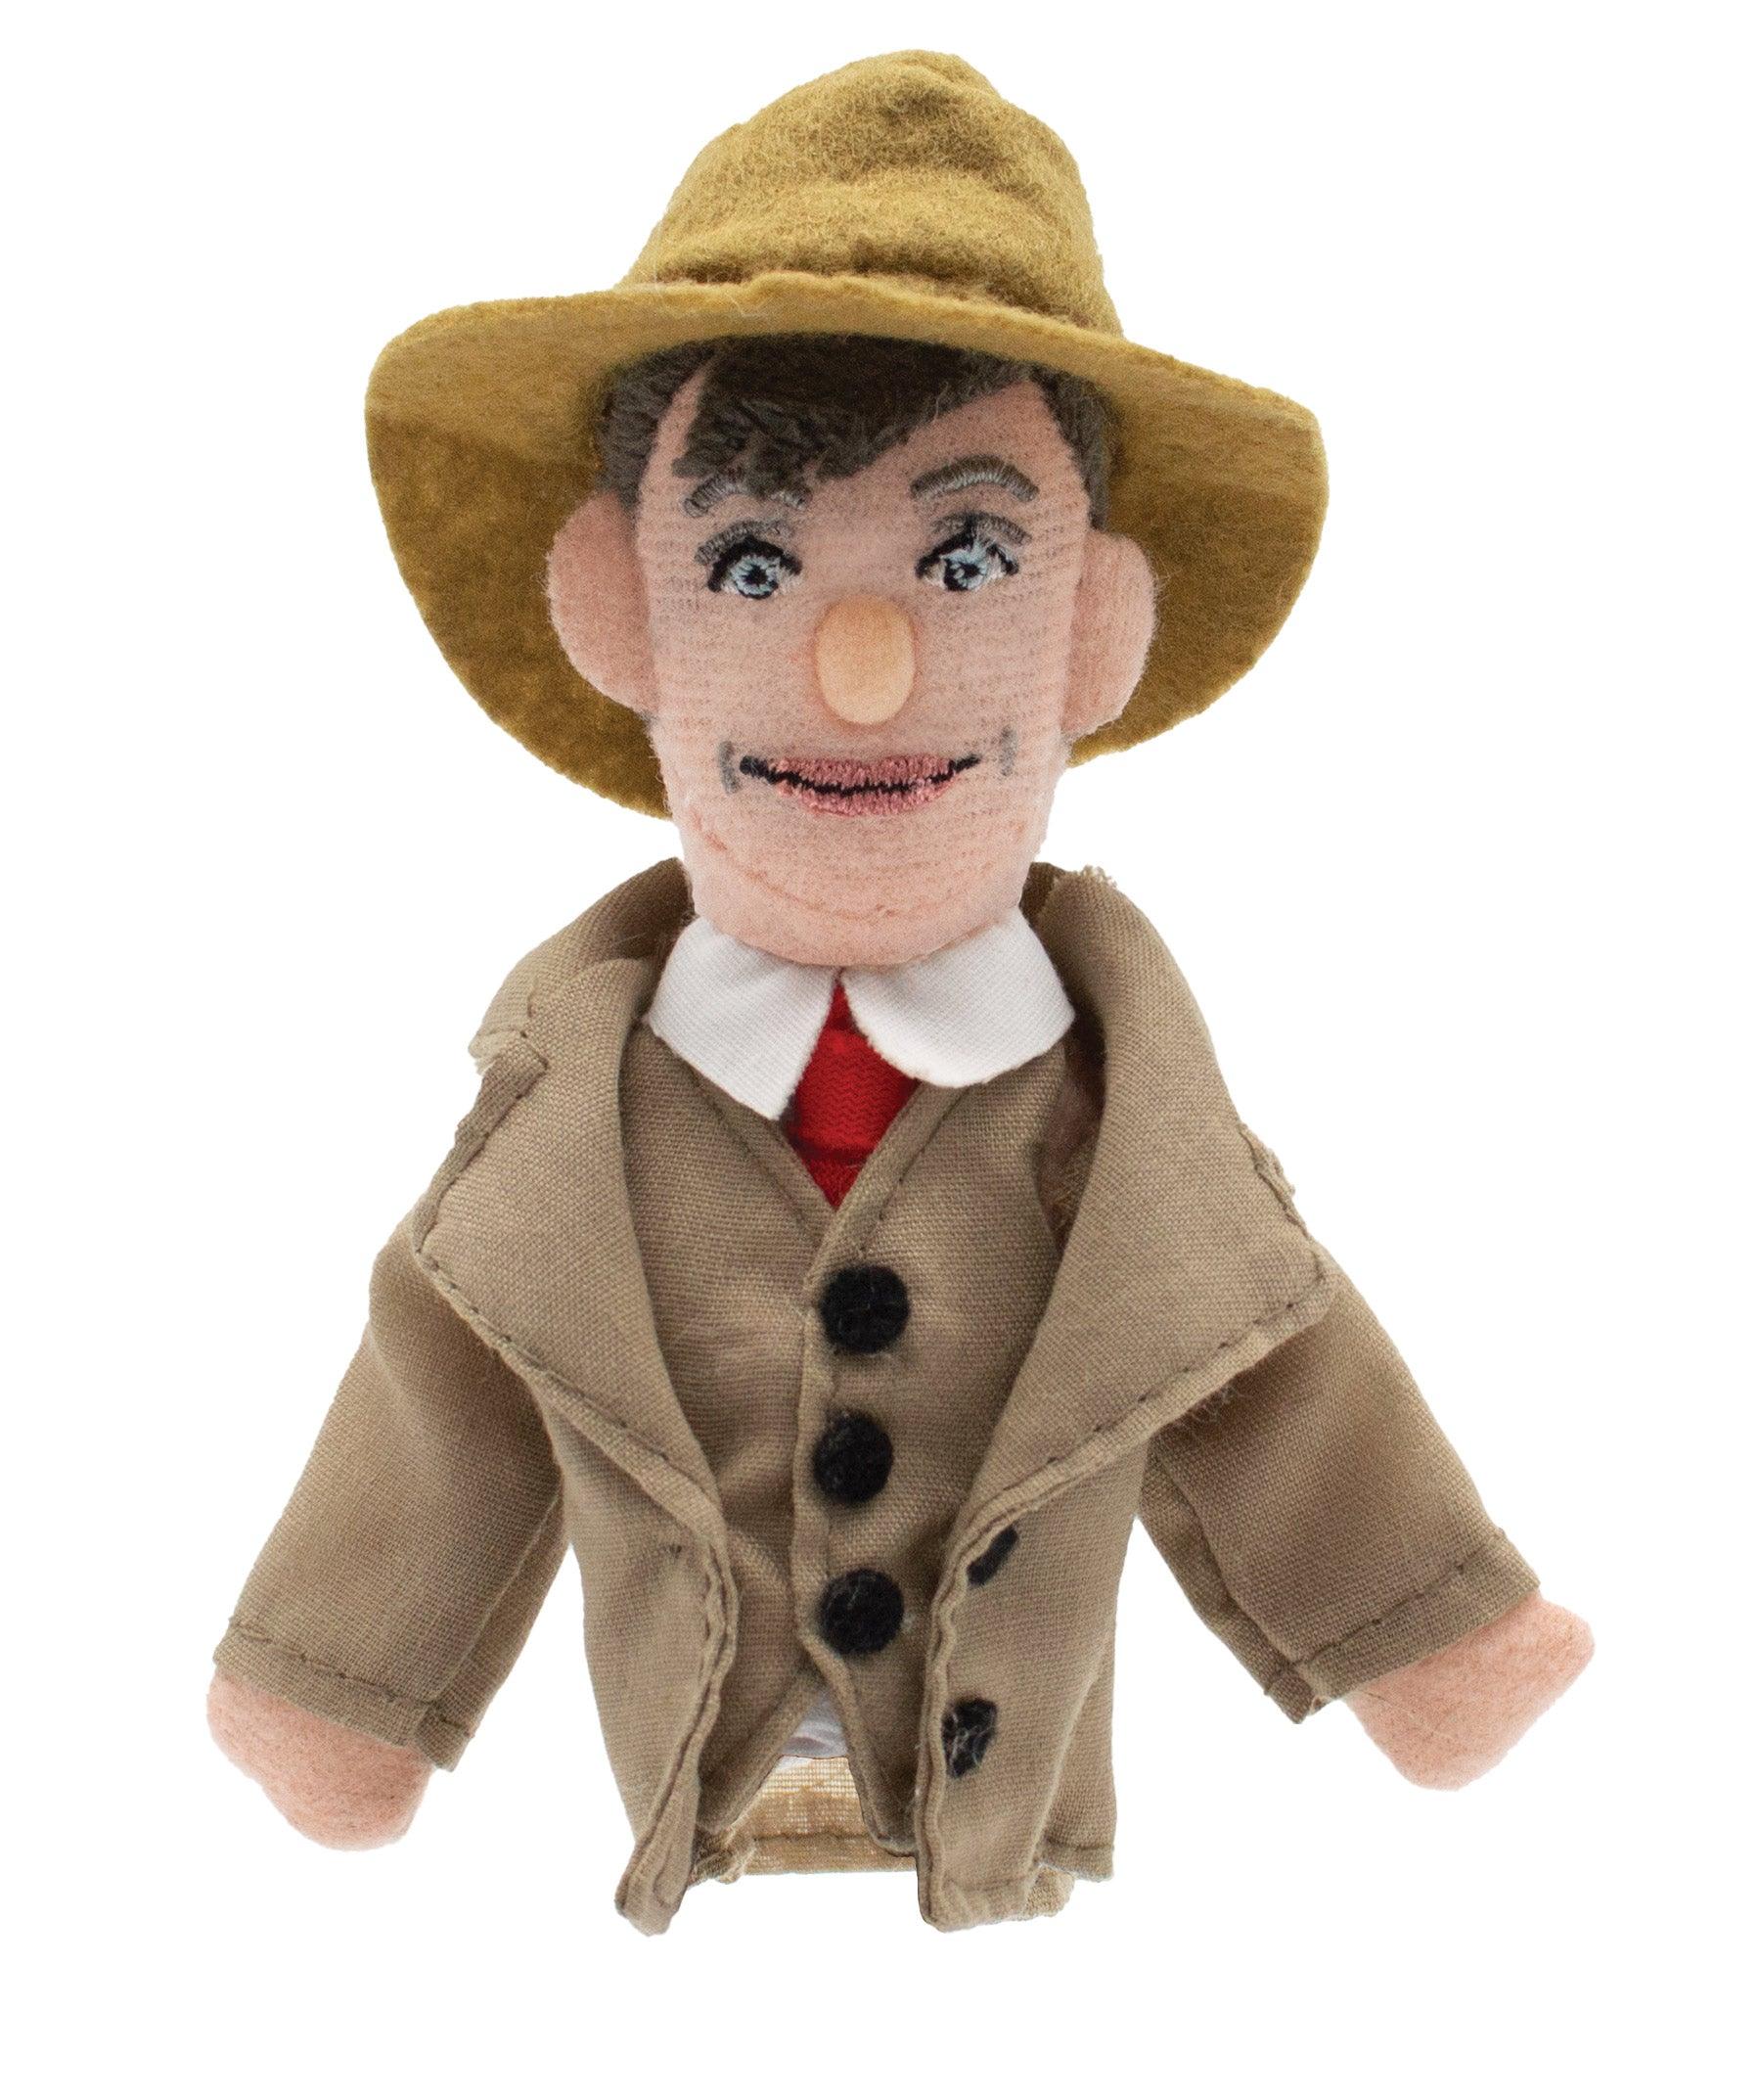 Product photo of Will Rogers Finger Puppet, a novelty gift manufactured by The Unemployed Philosophers Guild.